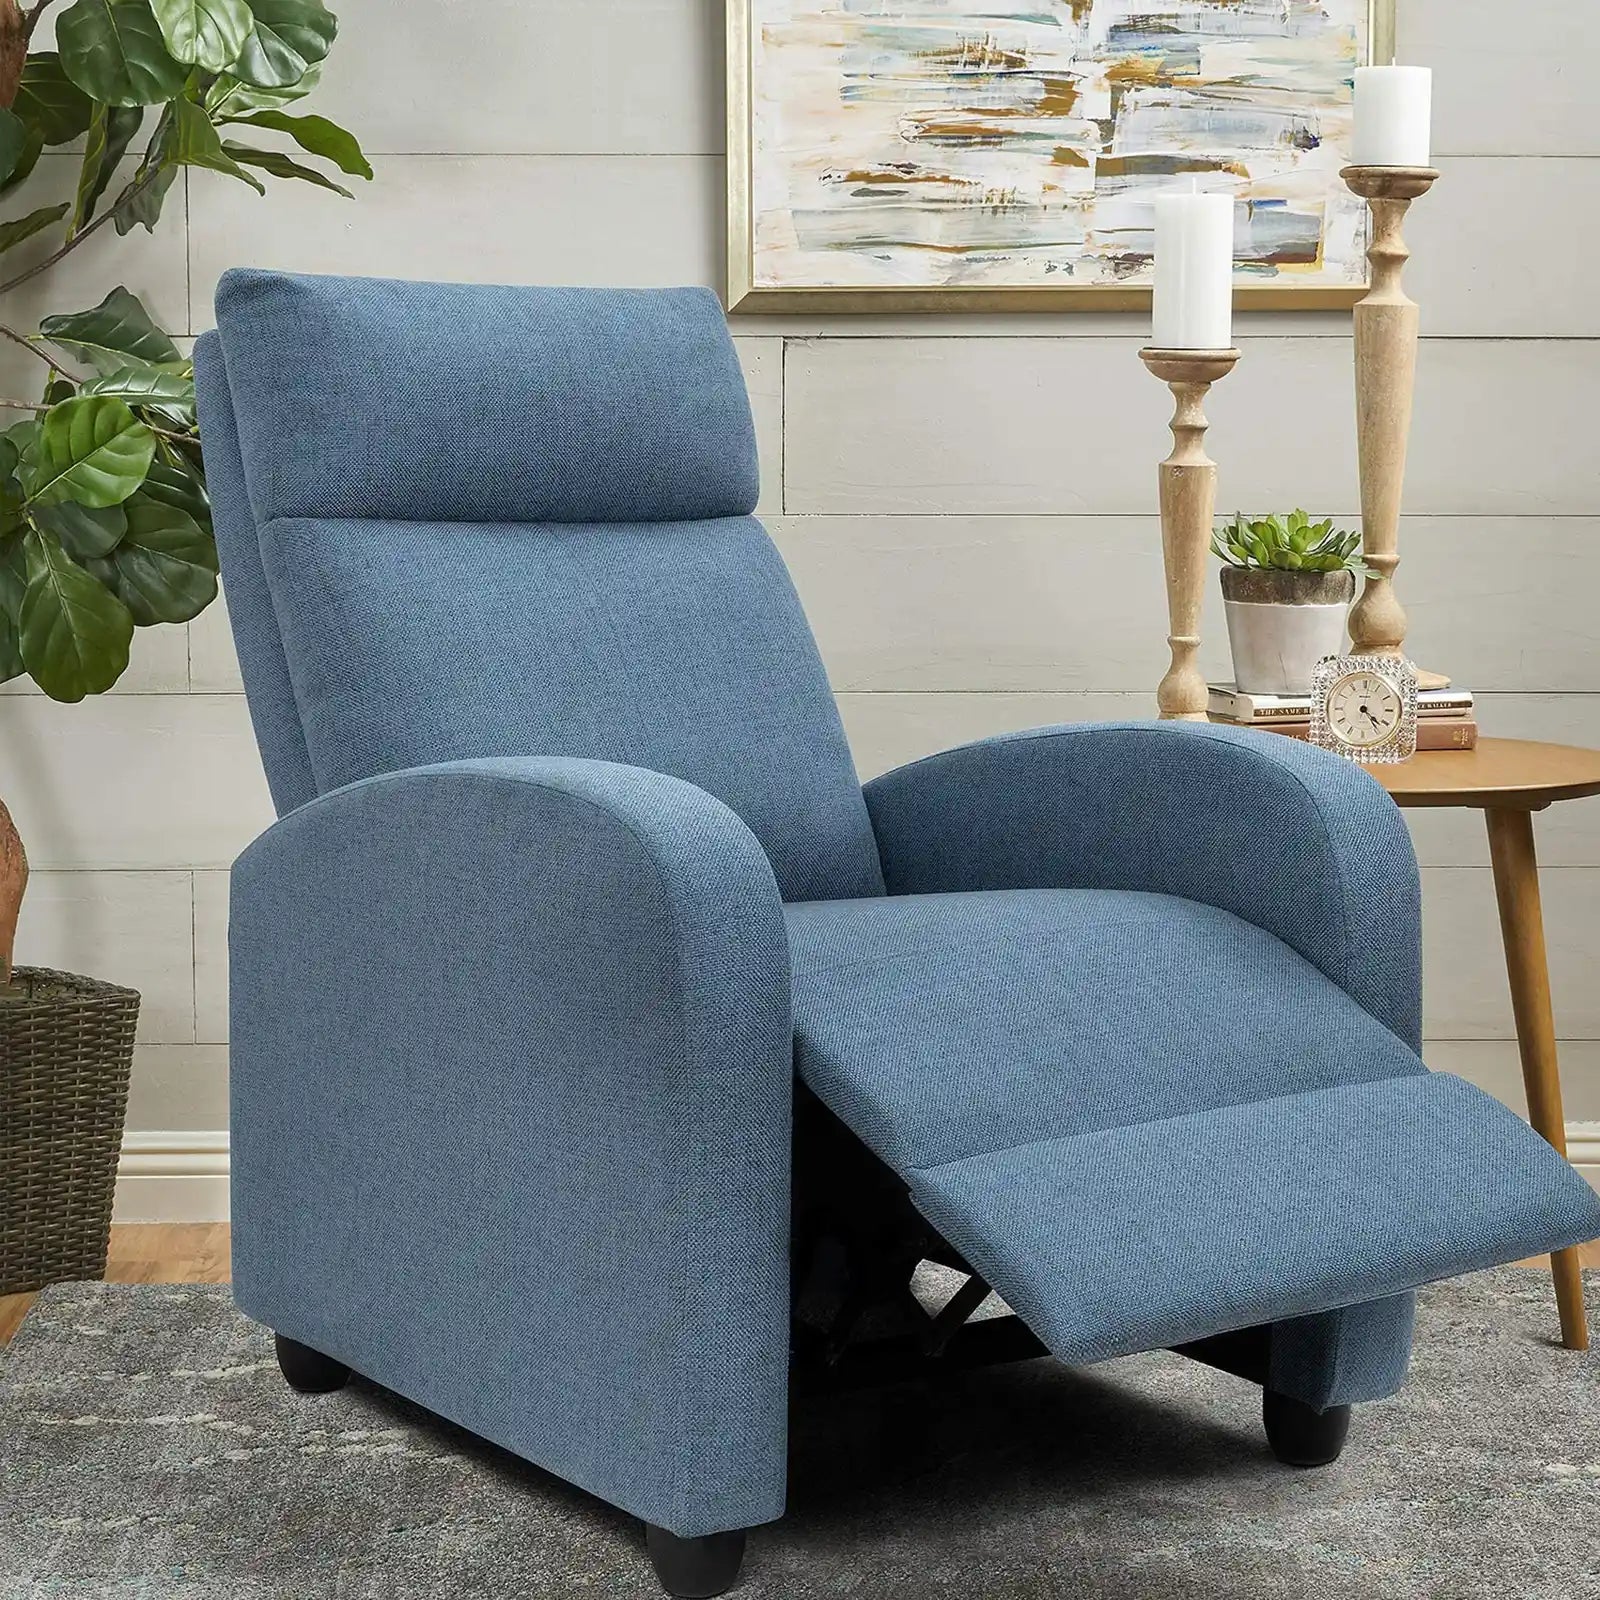 Recliner Chair Ergonomic Adjustable Single Fabric Sofa with Thicker Seat